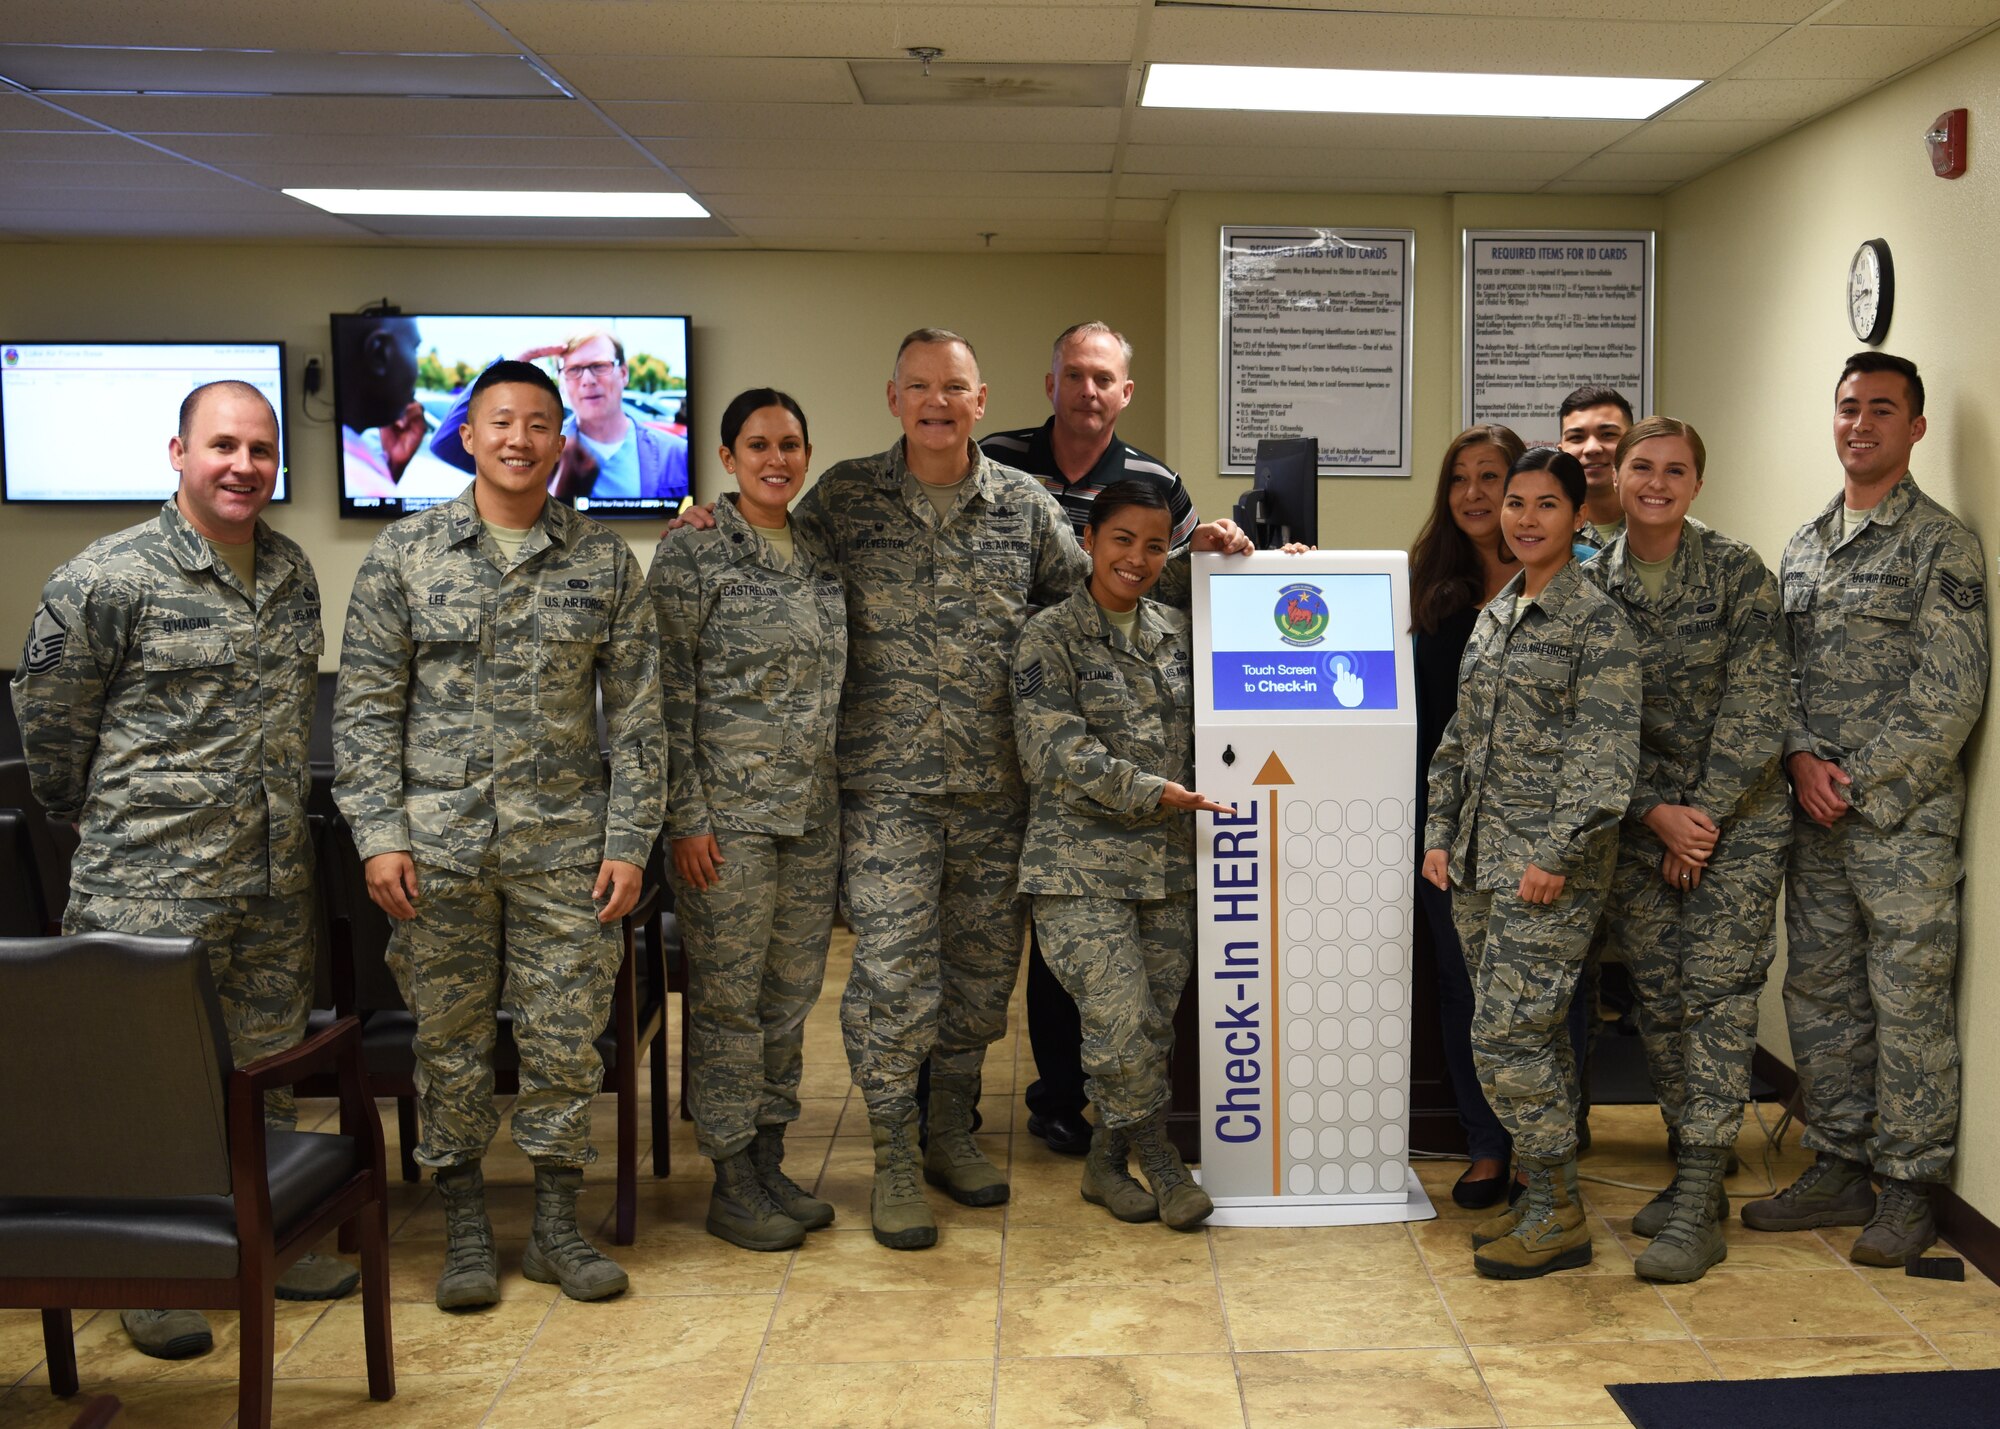 U.S. Air Force Col. Robert Sylvester, 56th Mission Support Group commander, stands with the 56th Force Support Squadron Military Personnel Flight Airmen in support of the newly installed check-in kiosk Aug. 29, 2018 at Luke Air Force Base, Ariz.